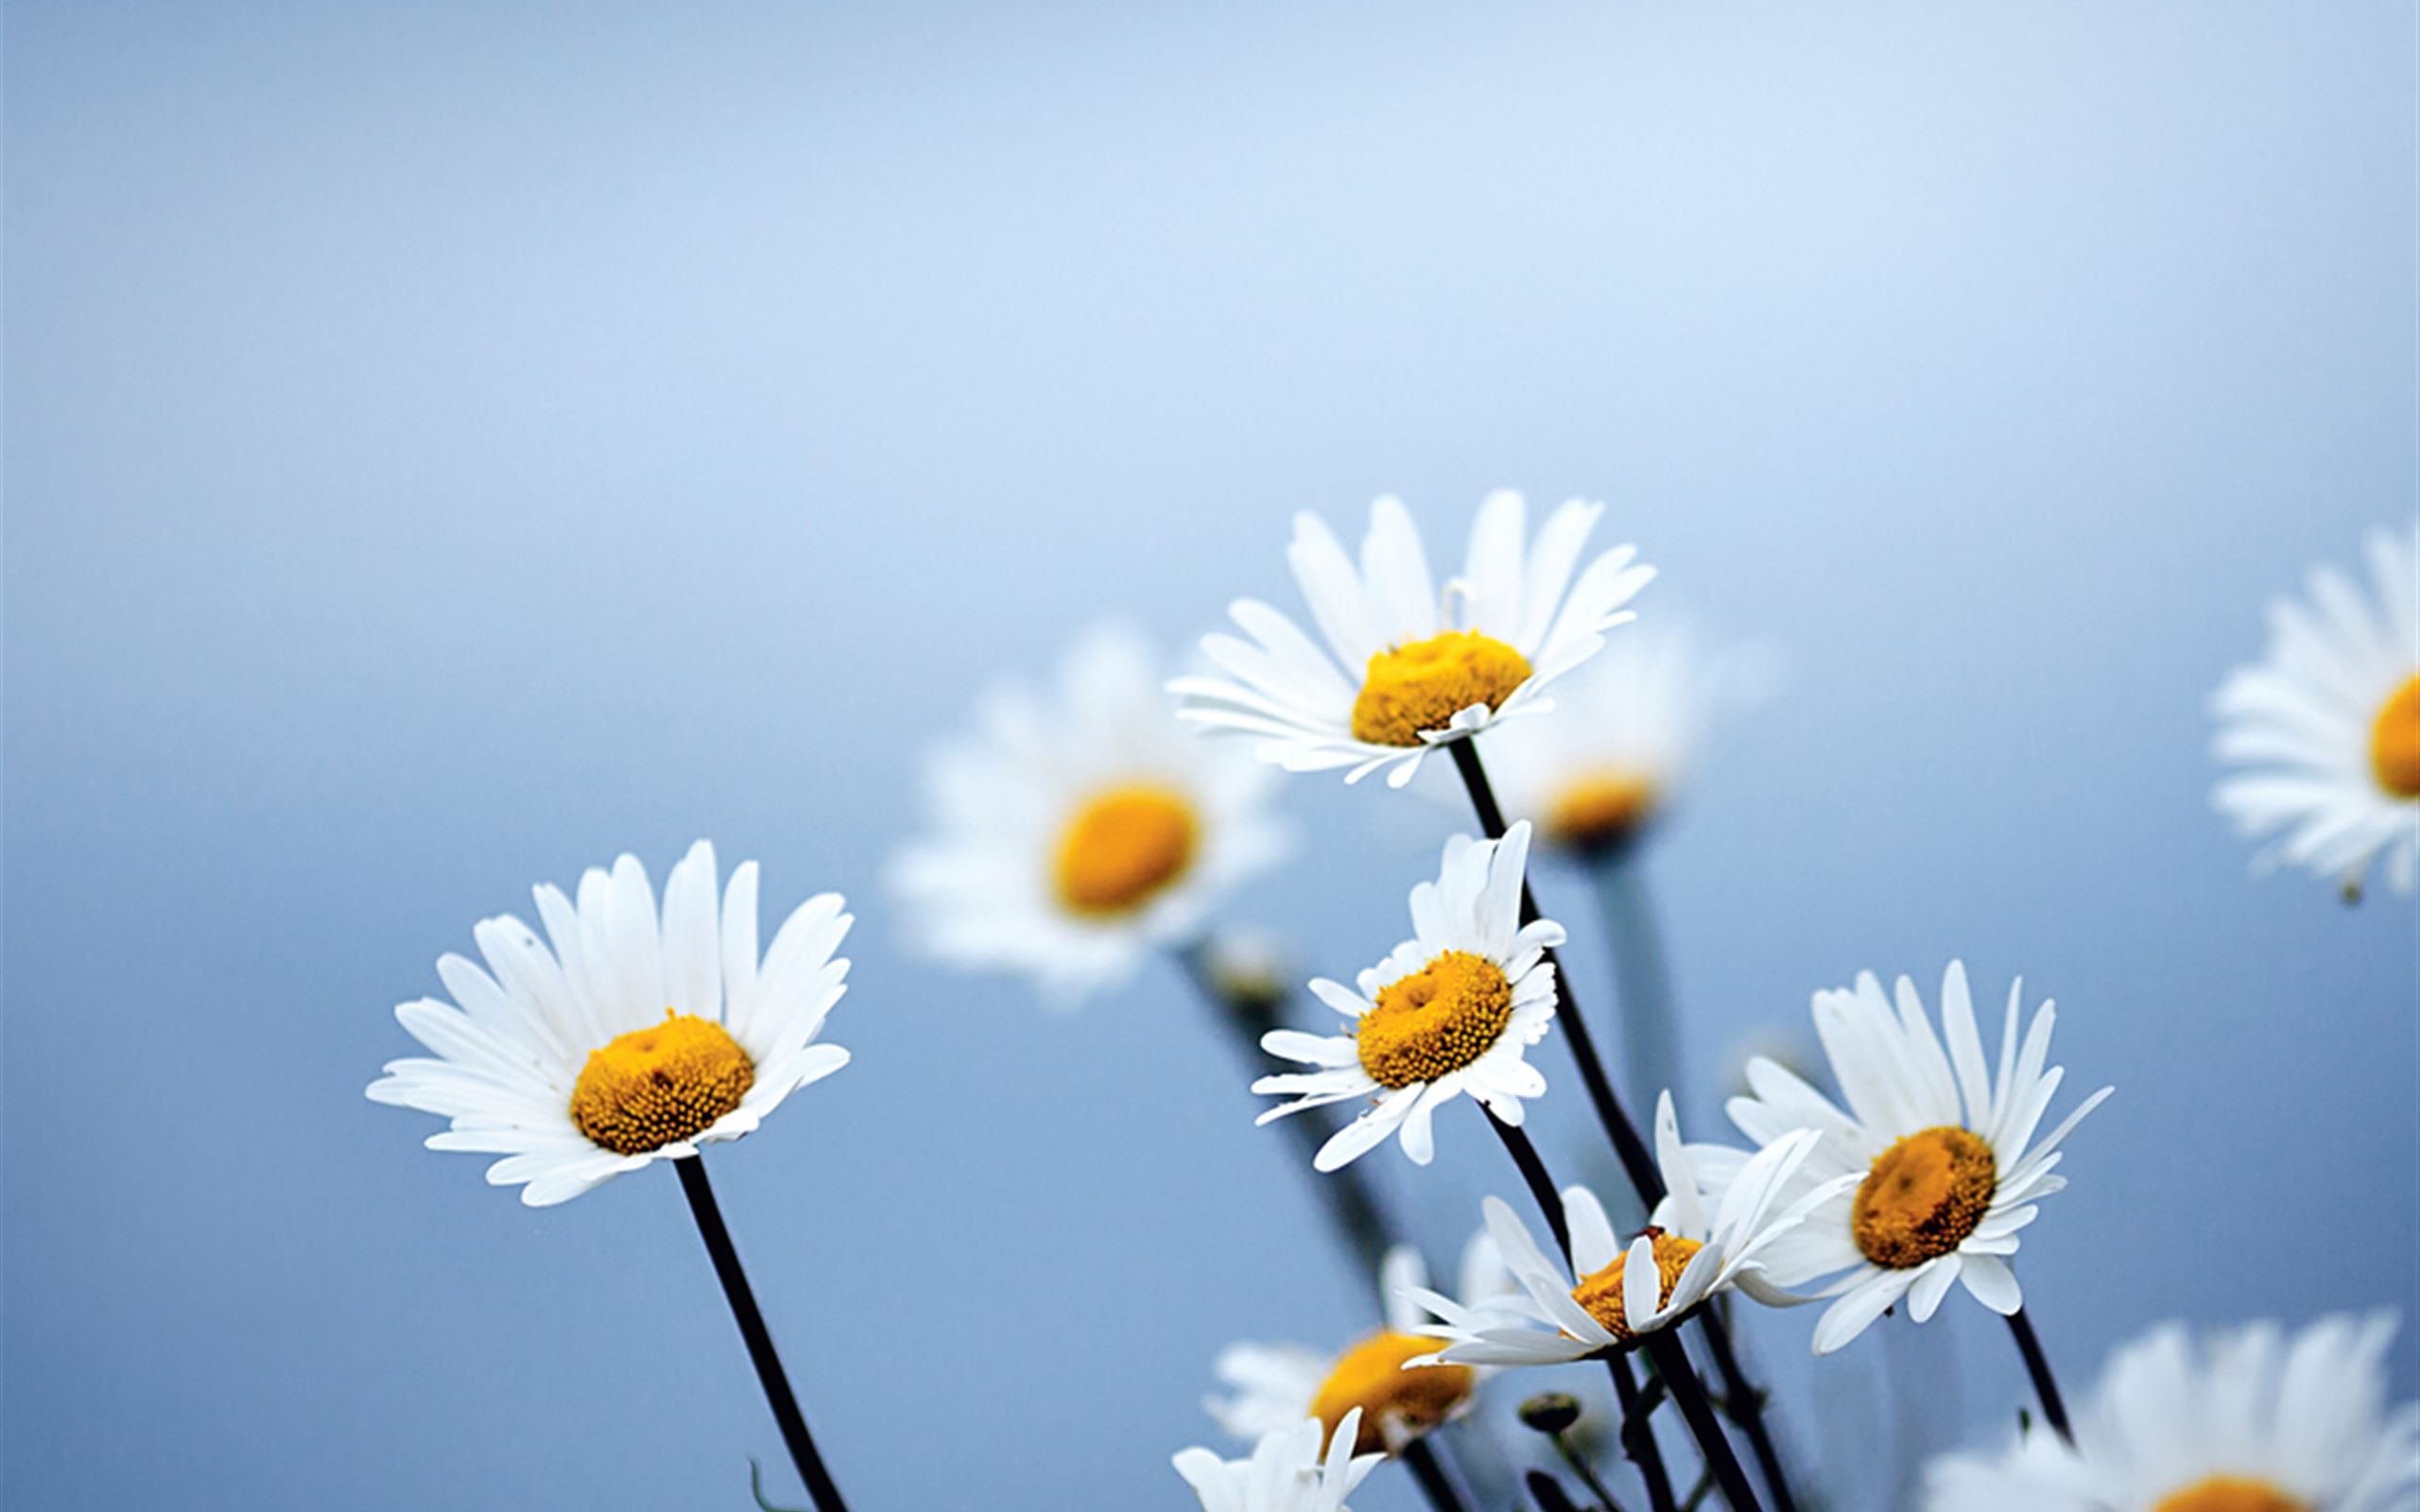 A bunch of daisies with a blue sky in the background - Daisy